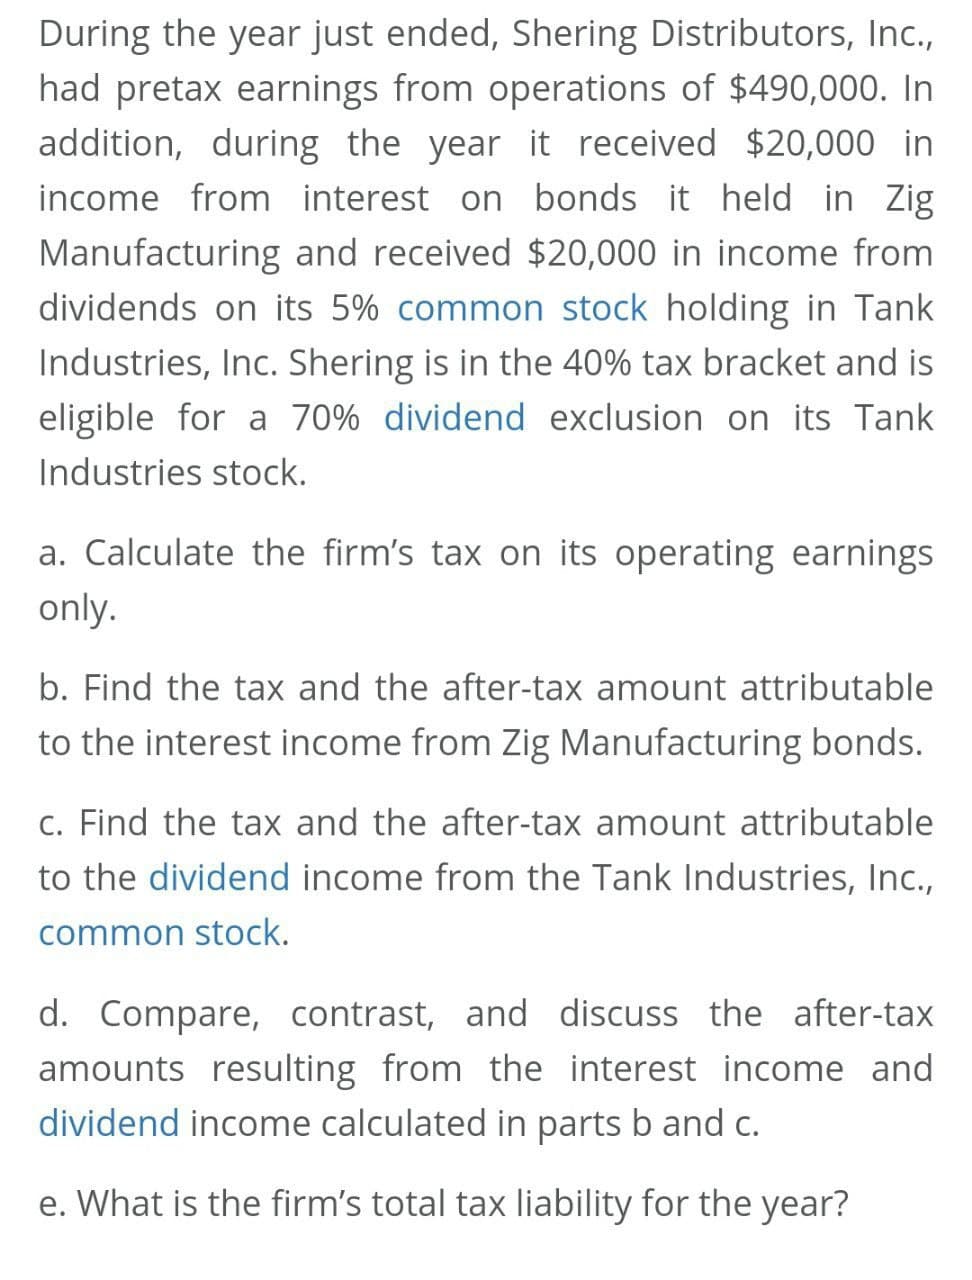 During the year just ended, Shering Distributors, Inc.,
had pretax earnings from operations of $490,000. In
addition, during the year it received $20,000 in
income from interest on bonds it held in Zig
Manufacturing and received $20,000 in income from
dividends on its 5% common stock holding in Tank
Industries, Inc. Shering is in the 40% tax bracket and is
eligible for a 70% dividend exclusion on its Tank
Industries stock.
a. Calculate the firm's tax on its operating earnings
only.
b. Find the tax and the after-tax amount attributable
to the interest income from Zig Manufacturing bonds.
c. Find the tax and the after-tax amount attributable
to the dividend income from the Tank Industries, Inc.,
common stock.
d. Compare, contrast, and discuss the after-tax
amounts resulting from the interest income and
dividend income calculated in parts b and c.
e. What is the firm's total tax liability for the year?
